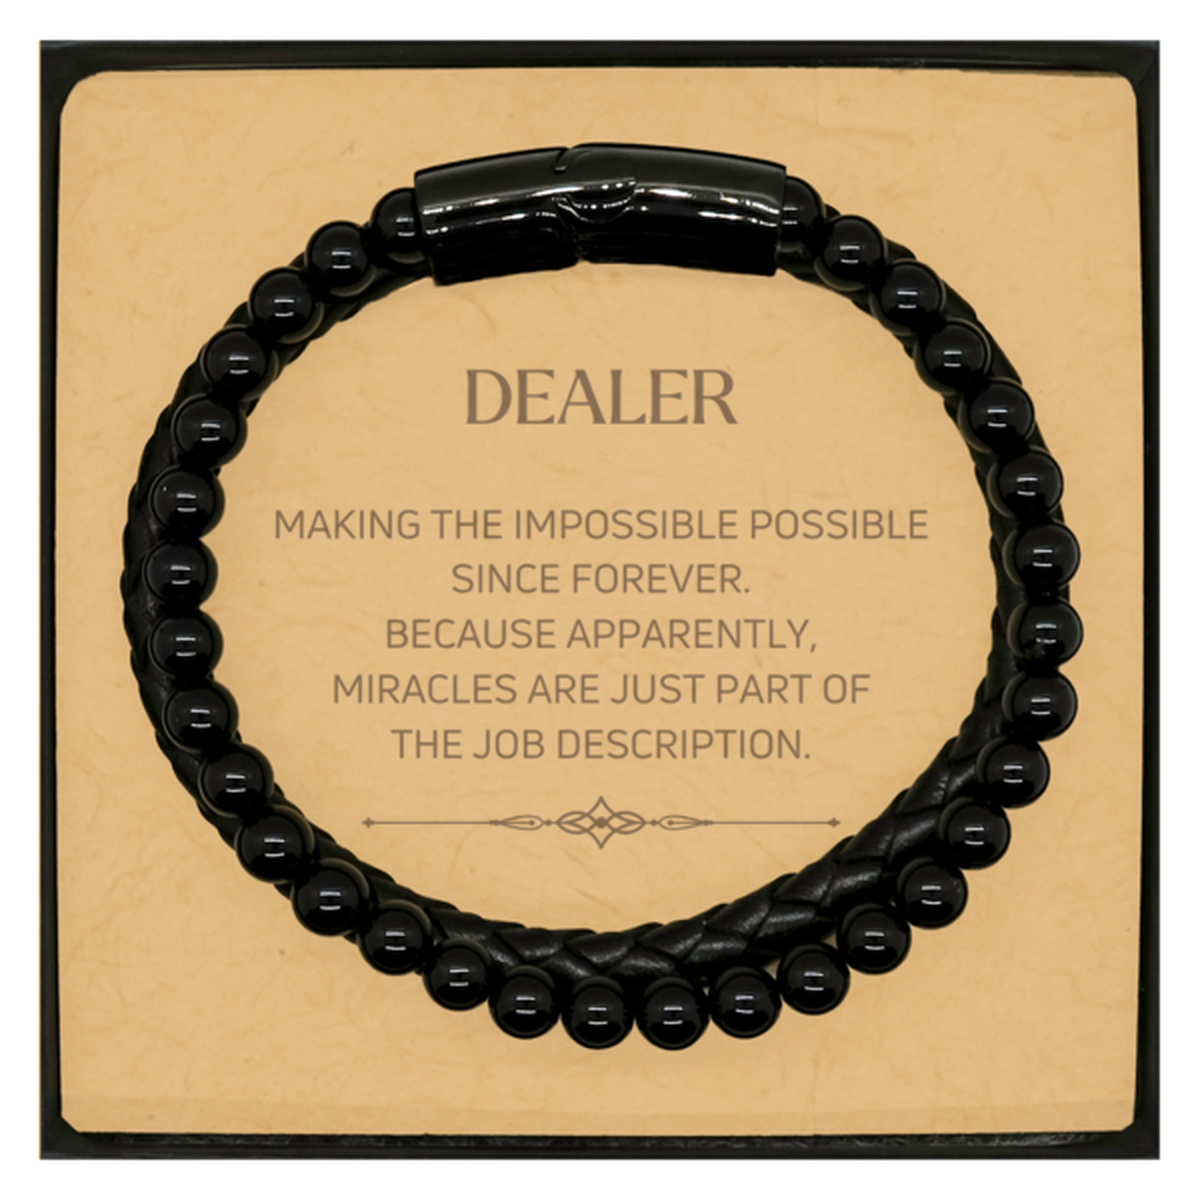 Funny Dealer Gifts, Miracles are just part of the job description, Inspirational Birthday Christmas Stone Leather Bracelets For Dealer, Men, Women, Coworkers, Friends, Boss